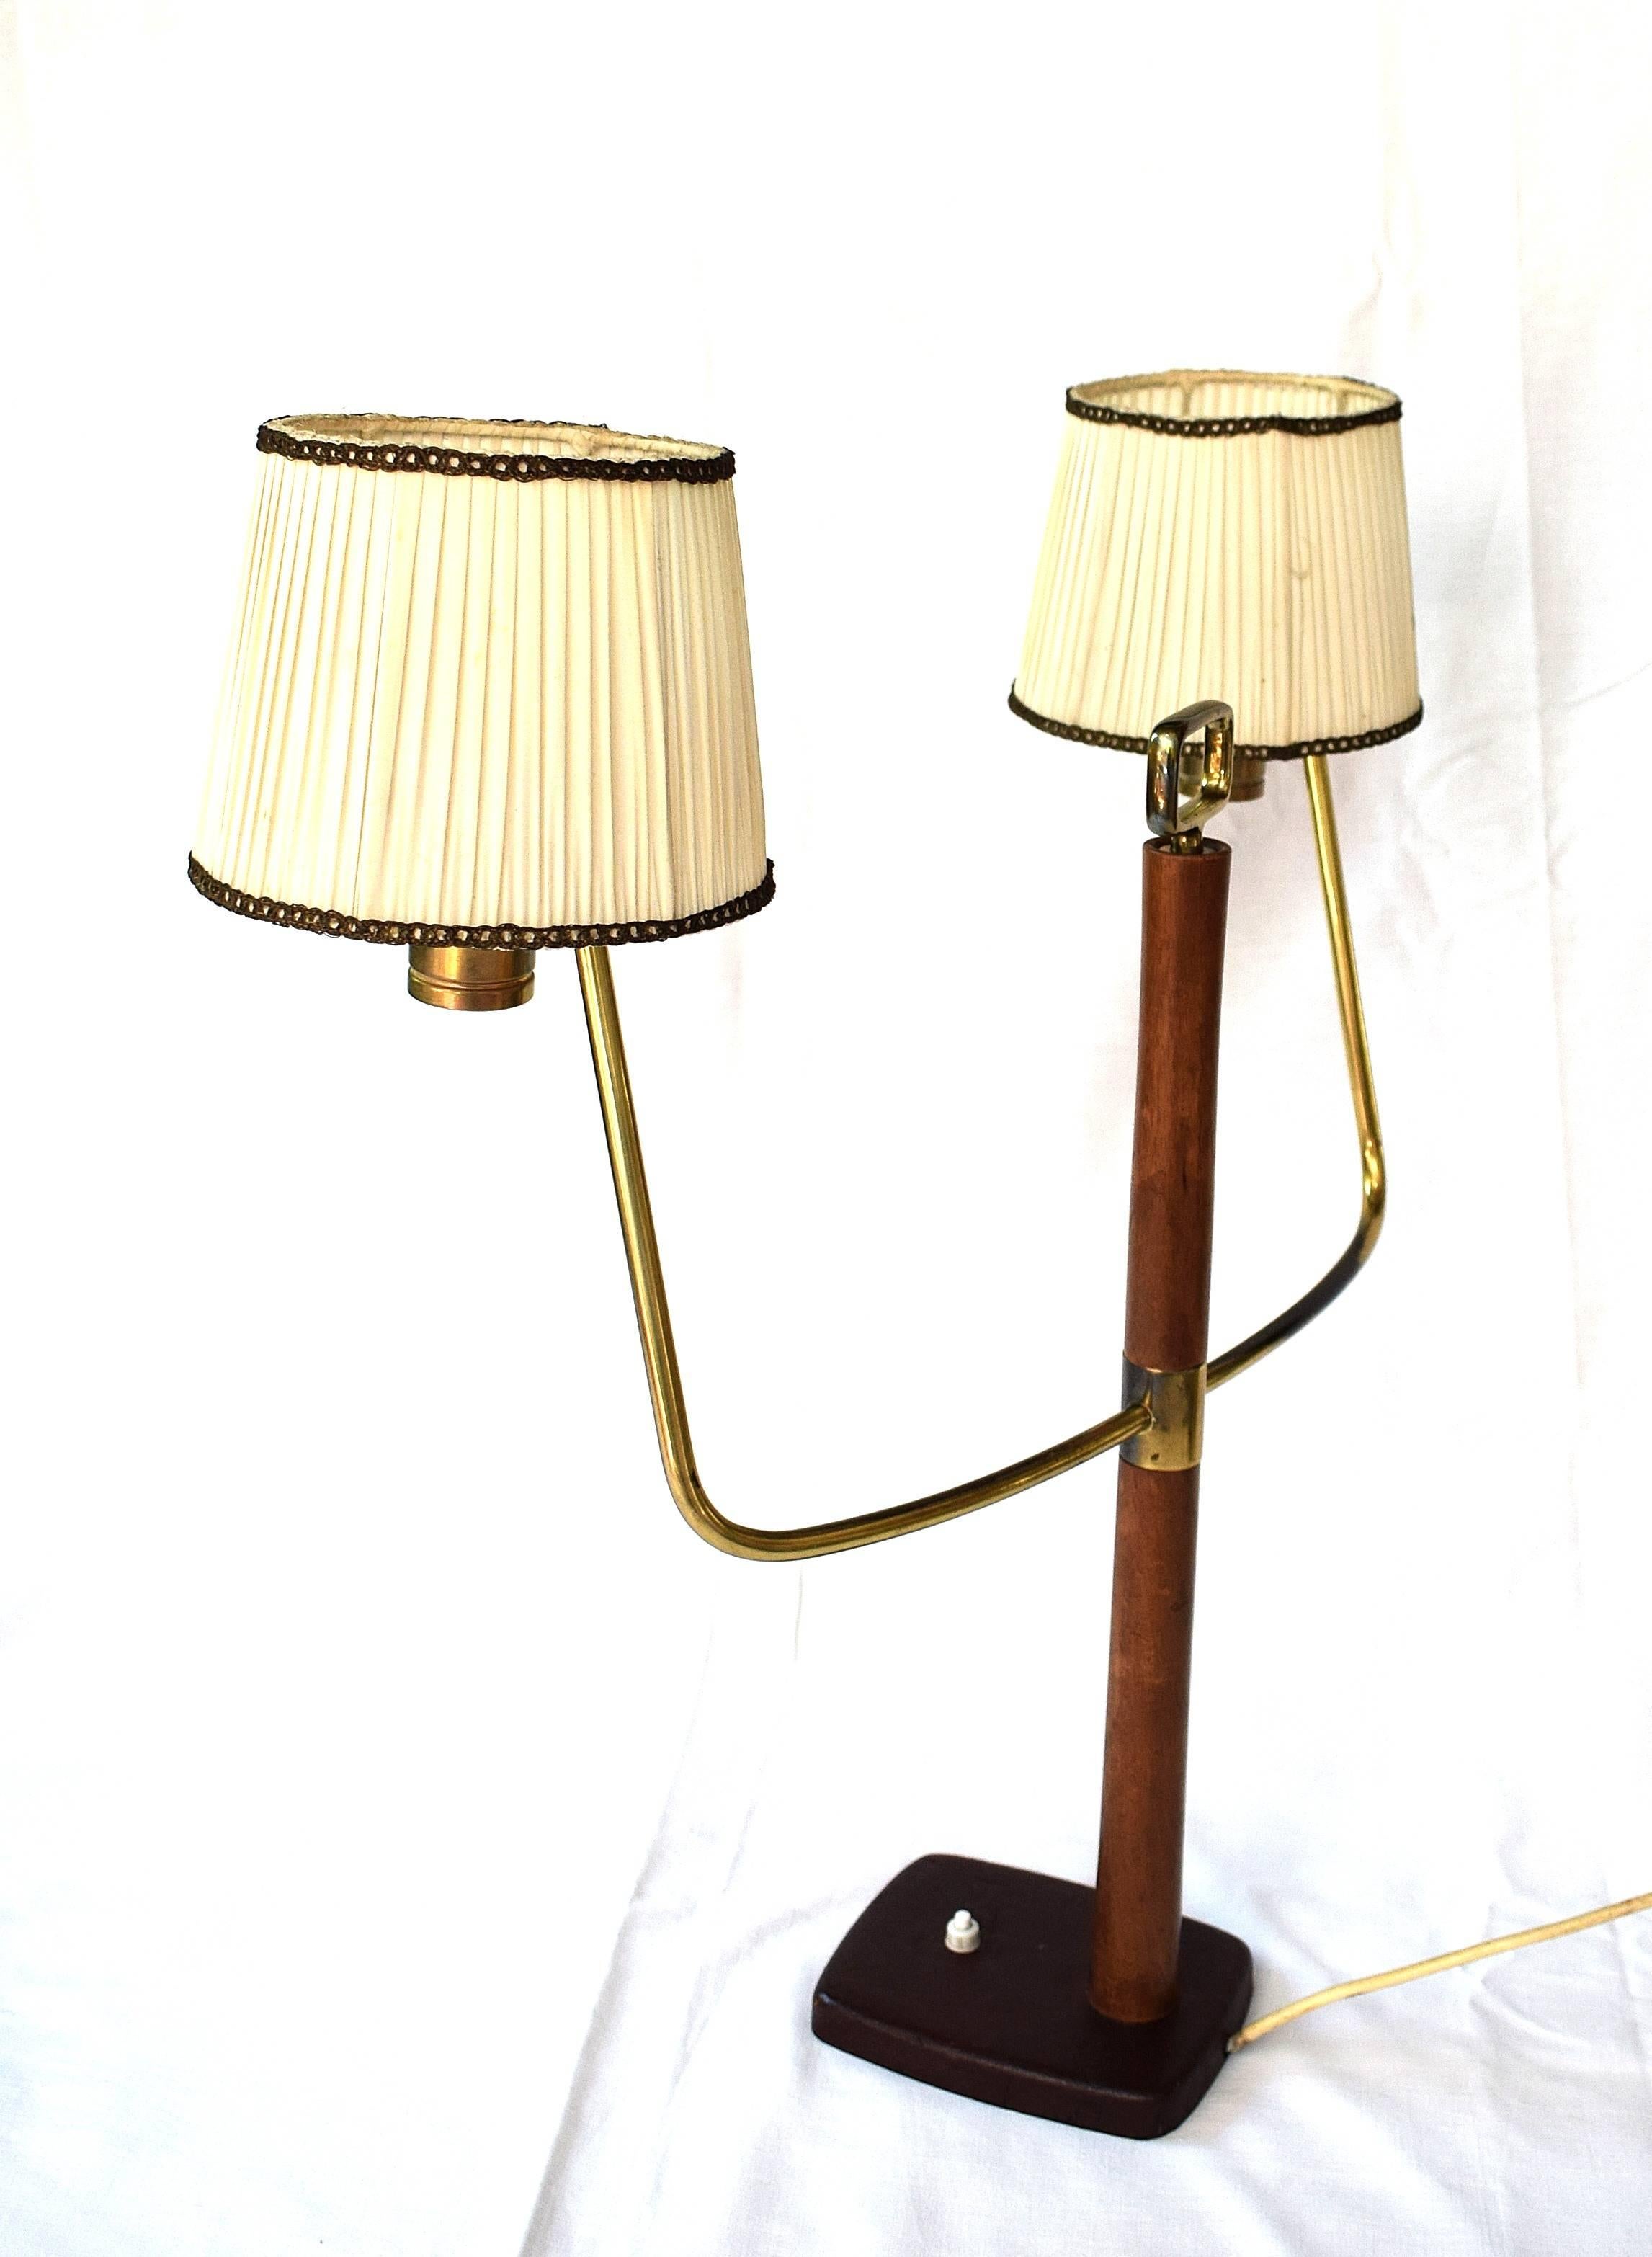 Art Deco Large Table Lamp by Josef Frank for J.T. Kalmar, 1930s For Sale